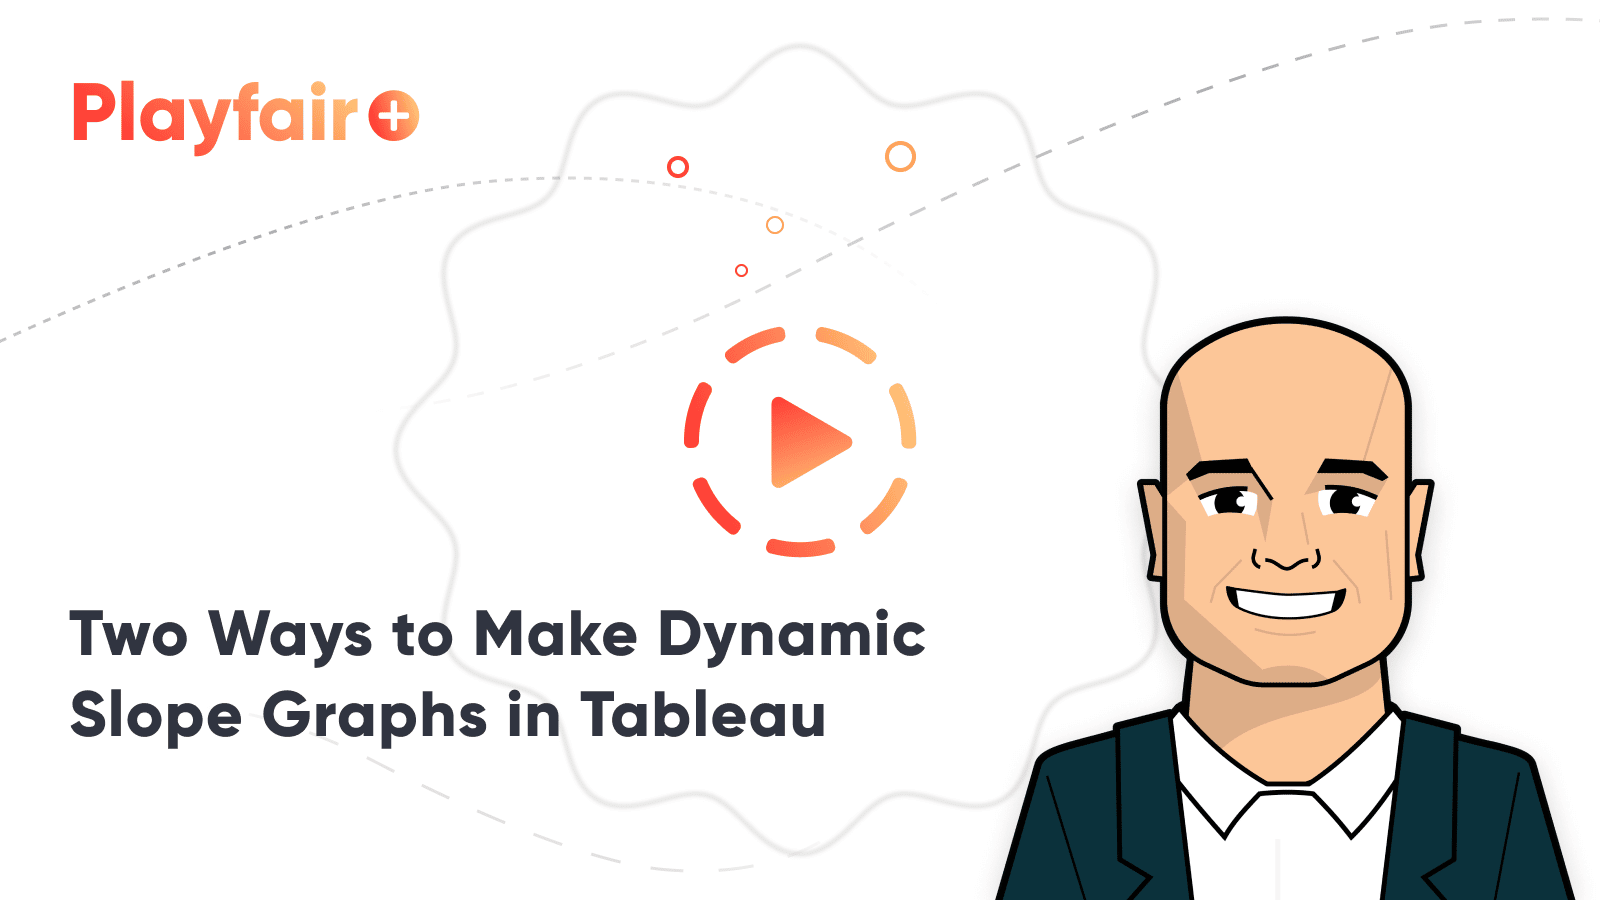 Two Ways to Make Dynamic Slope Graphs in Tableau